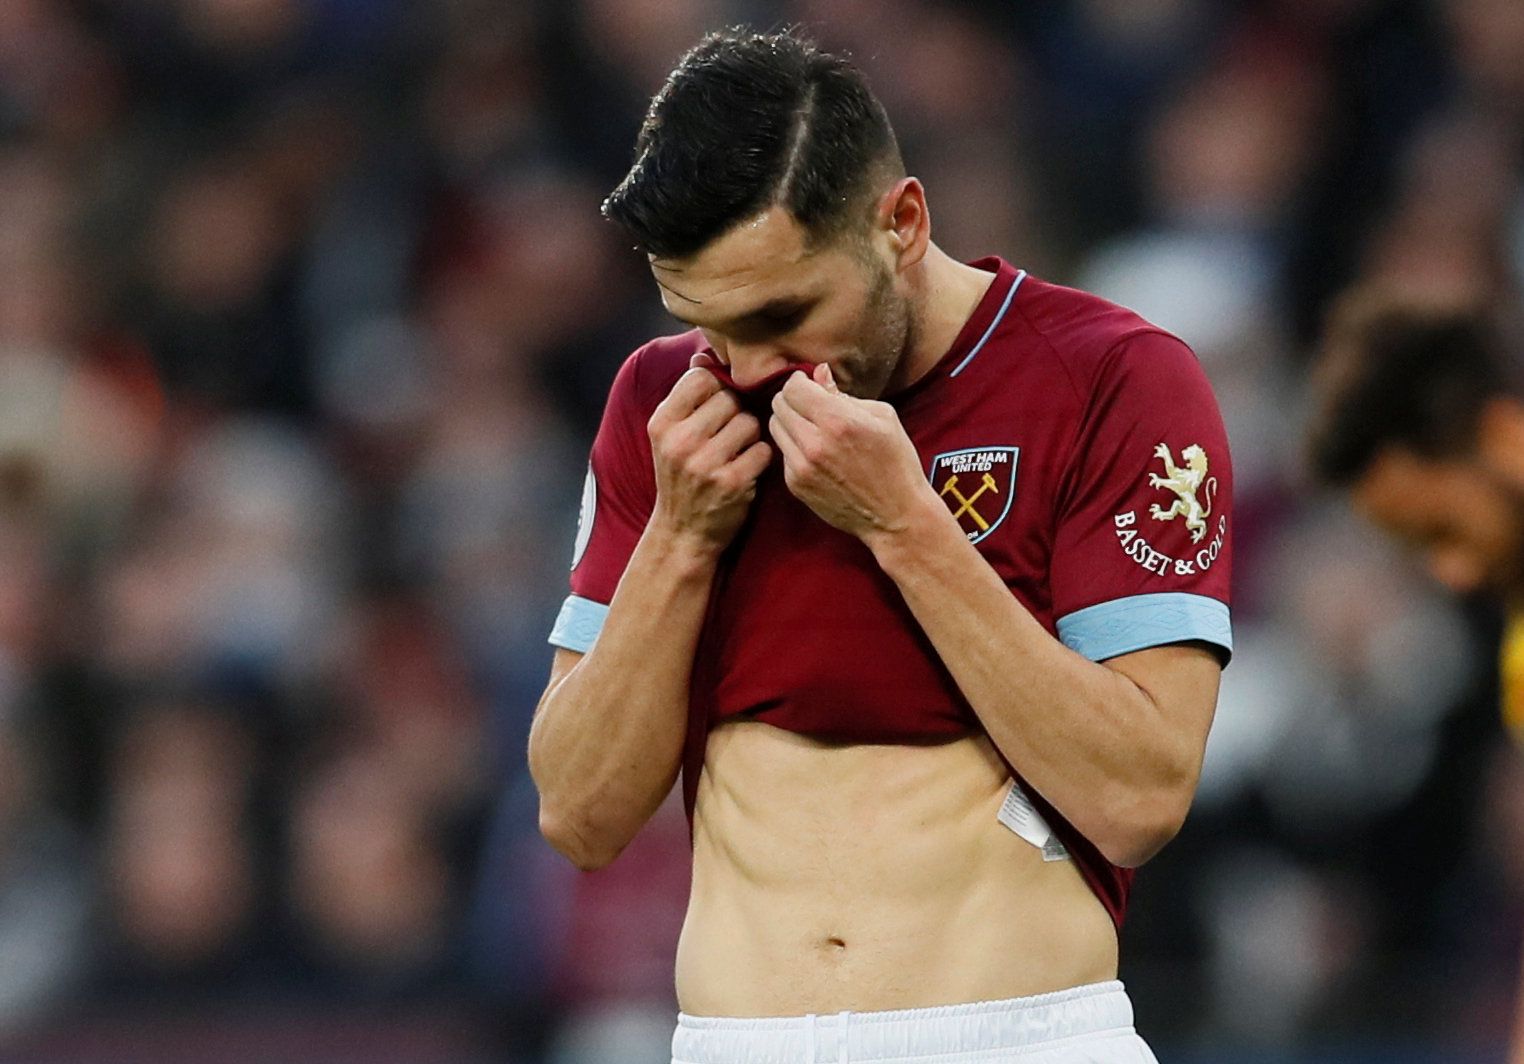 Soccer Football - Premier League - West Ham United v Crystal Palace - London Stadium, London, Britain - December 8, 2018  West Ham's Lucas Perez reats during the match     REUTERS/David Klein  EDITORIAL USE ONLY. No use with unauthorized audio, video, data, fixture lists, club/league logos or 